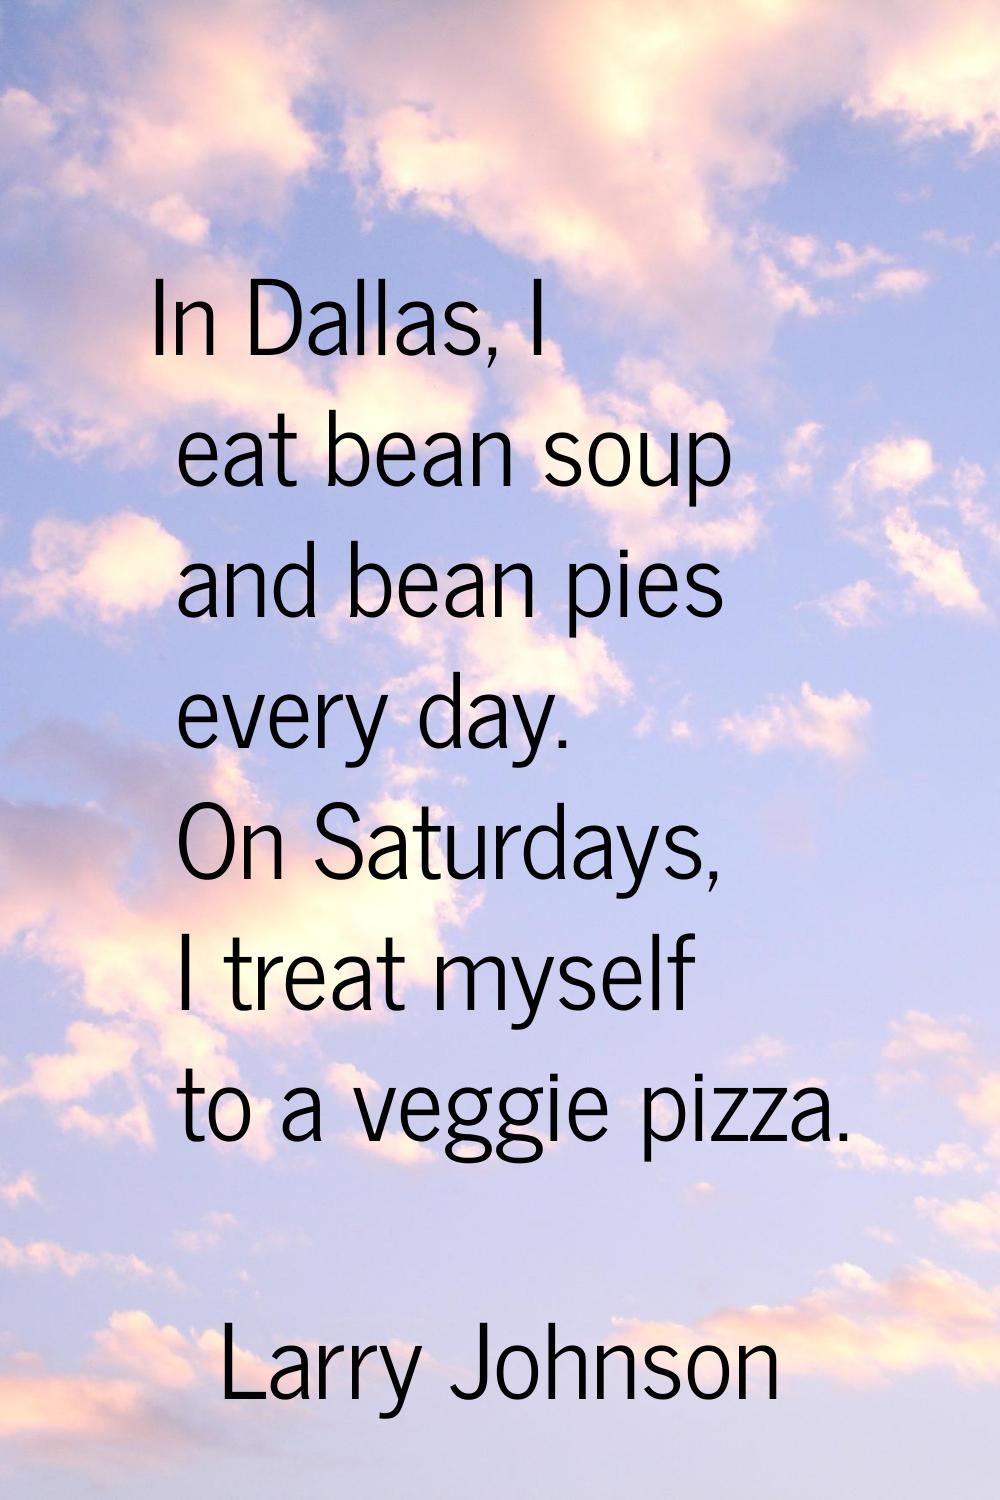 In Dallas, I eat bean soup and bean pies every day. On Saturdays, I treat myself to a veggie pizza.